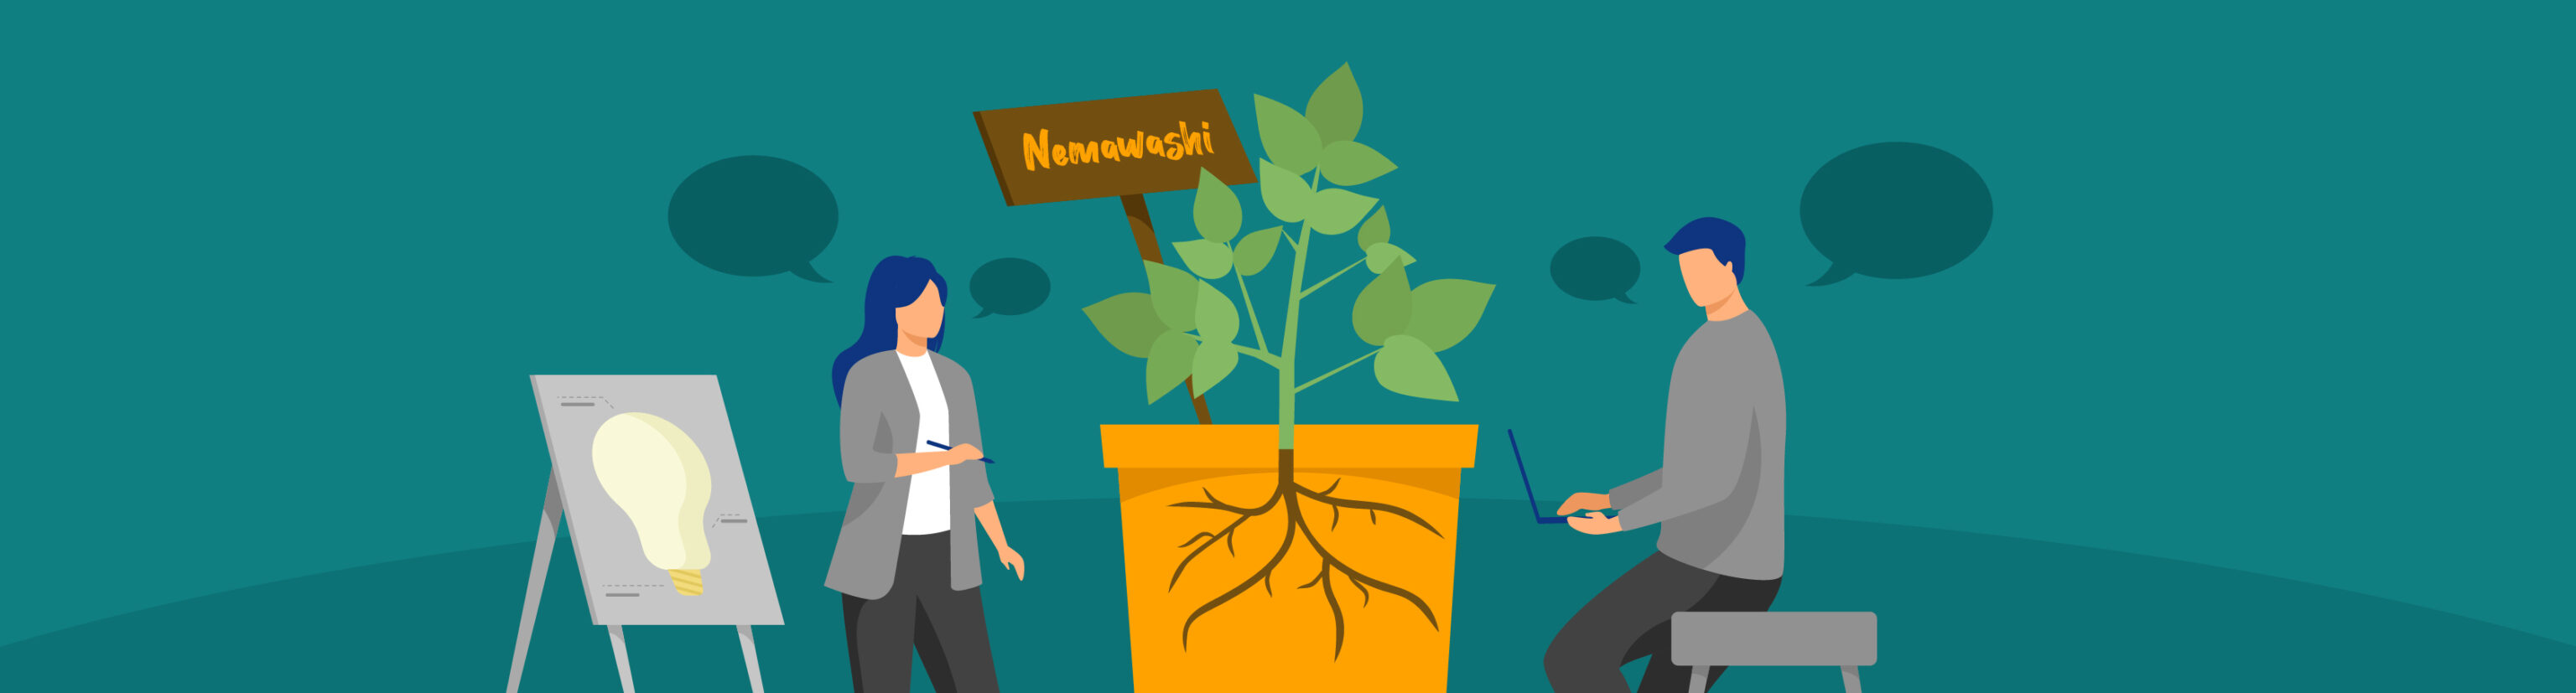 Graphic of two people having a discussion while roots grow in a plant pot between them